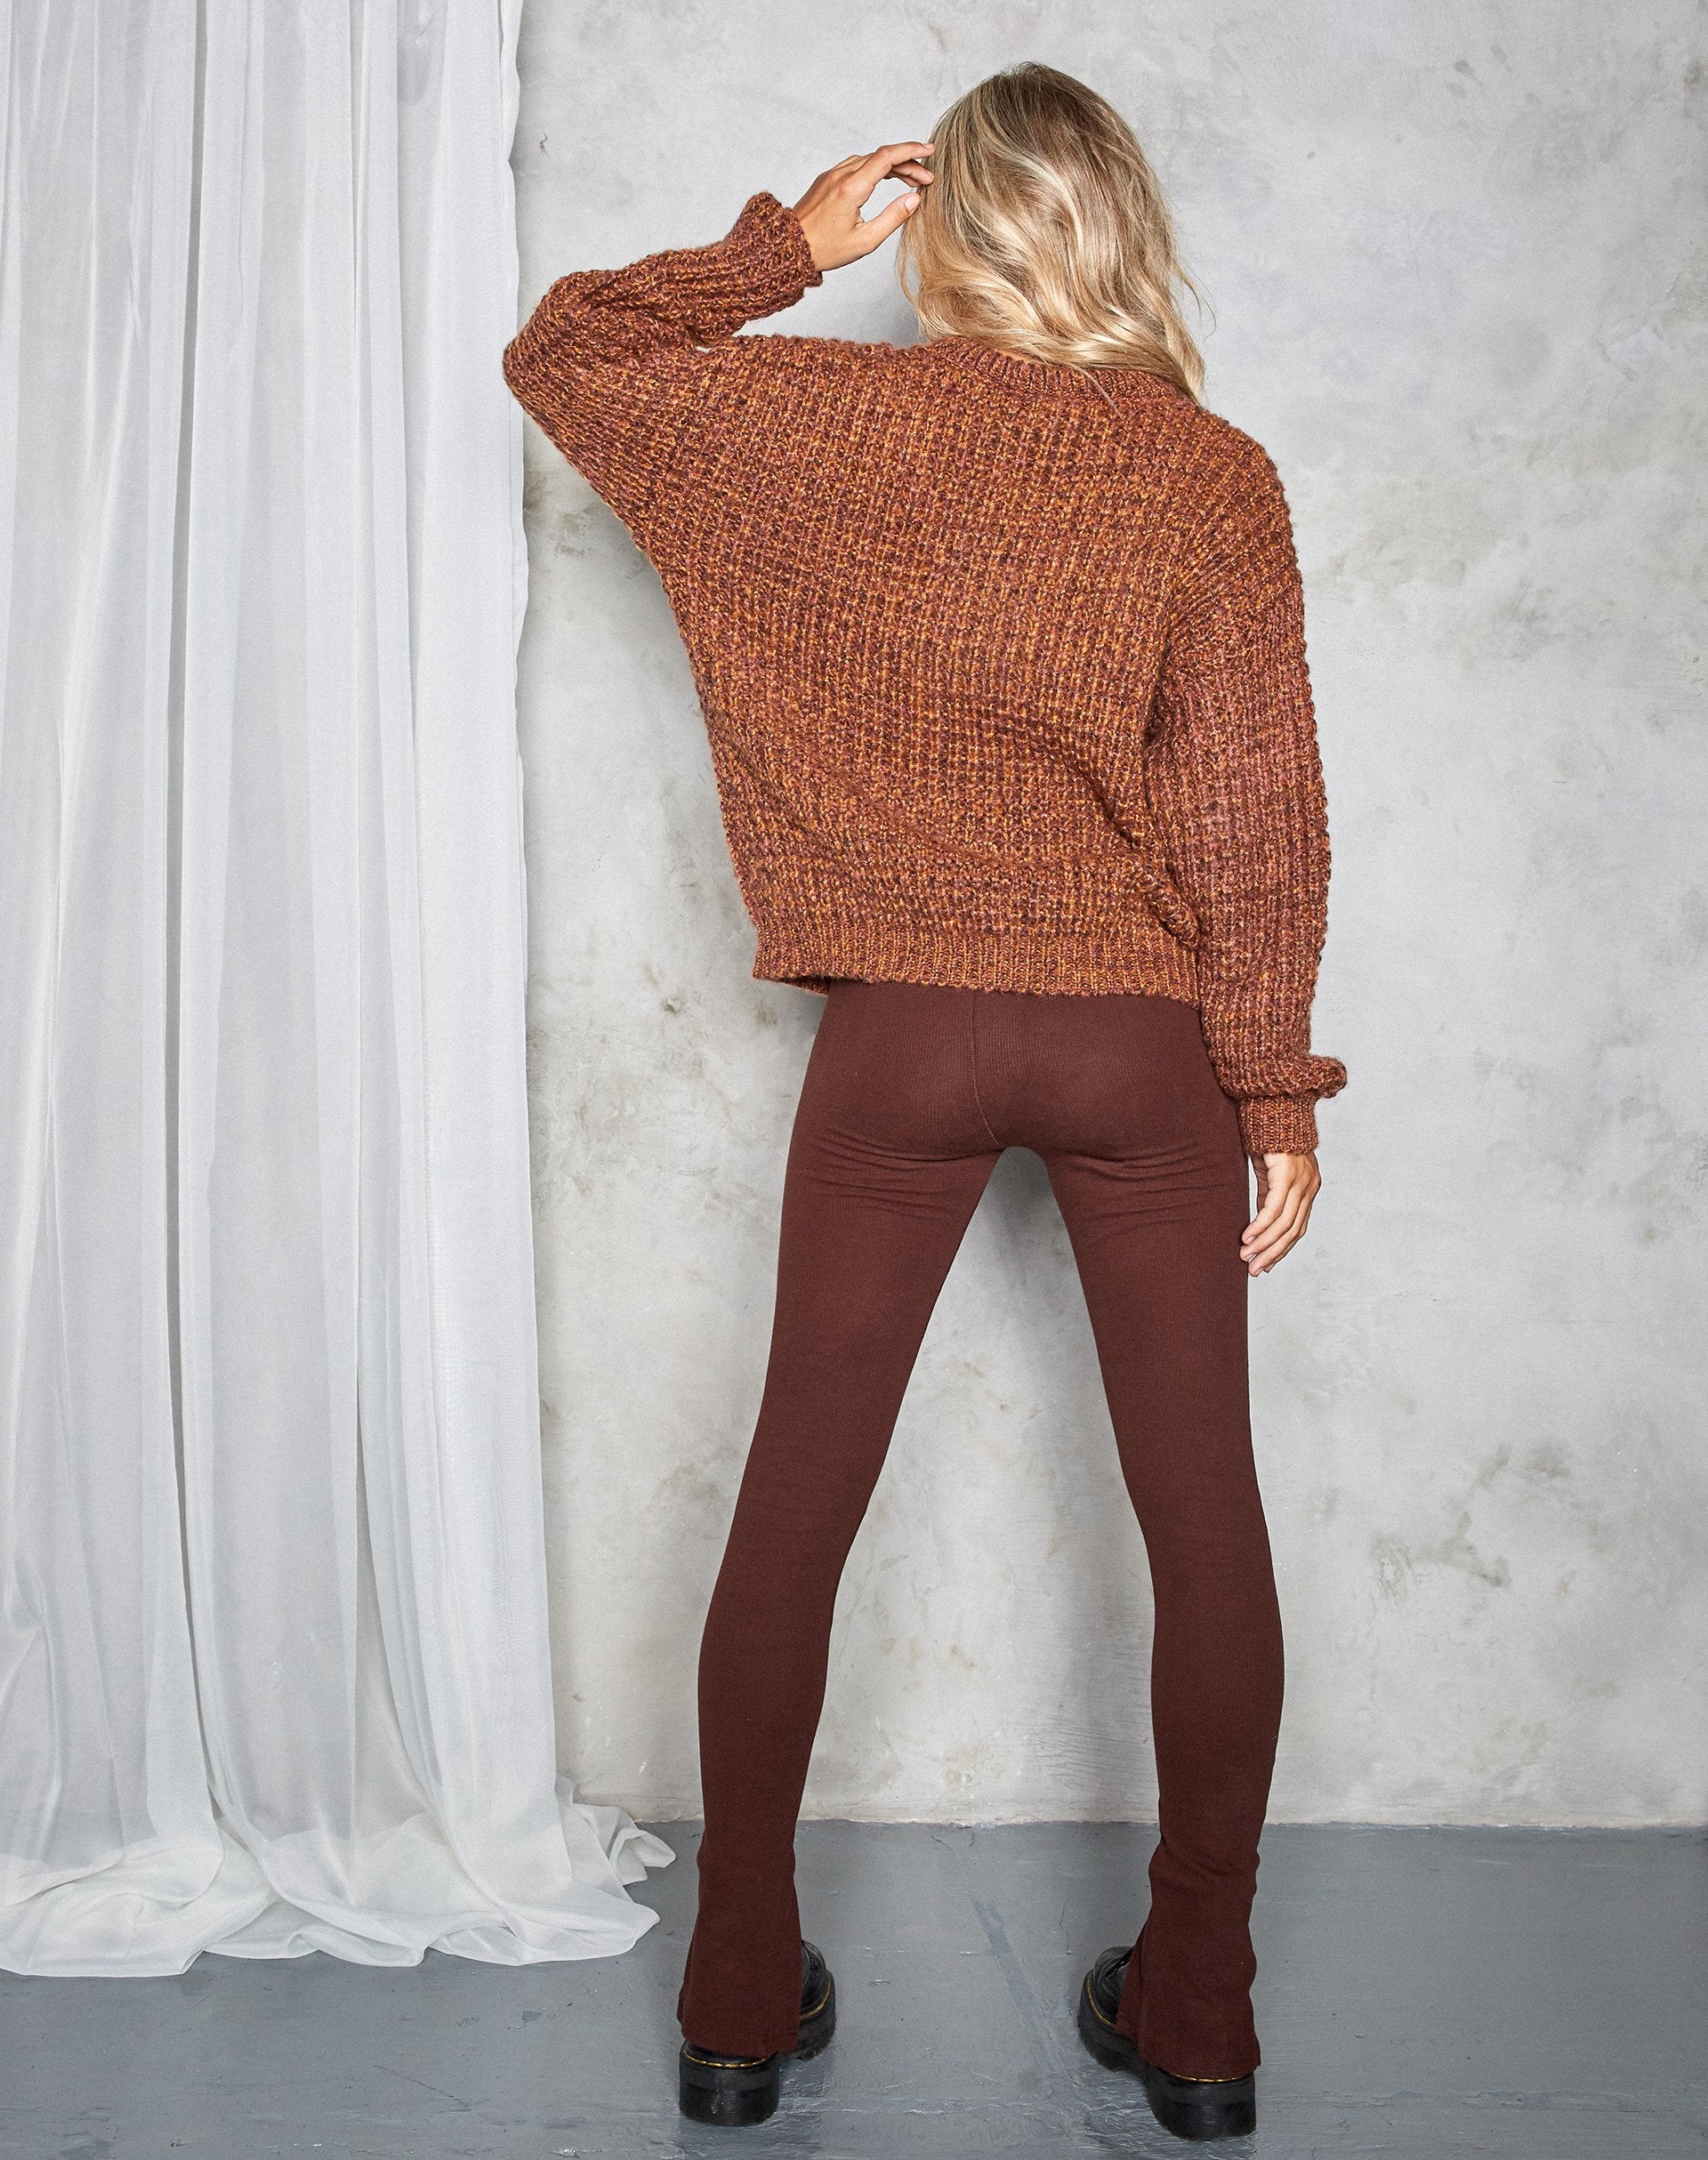 Image of Caribou Jumper in Chunky Knit Black and Ginger